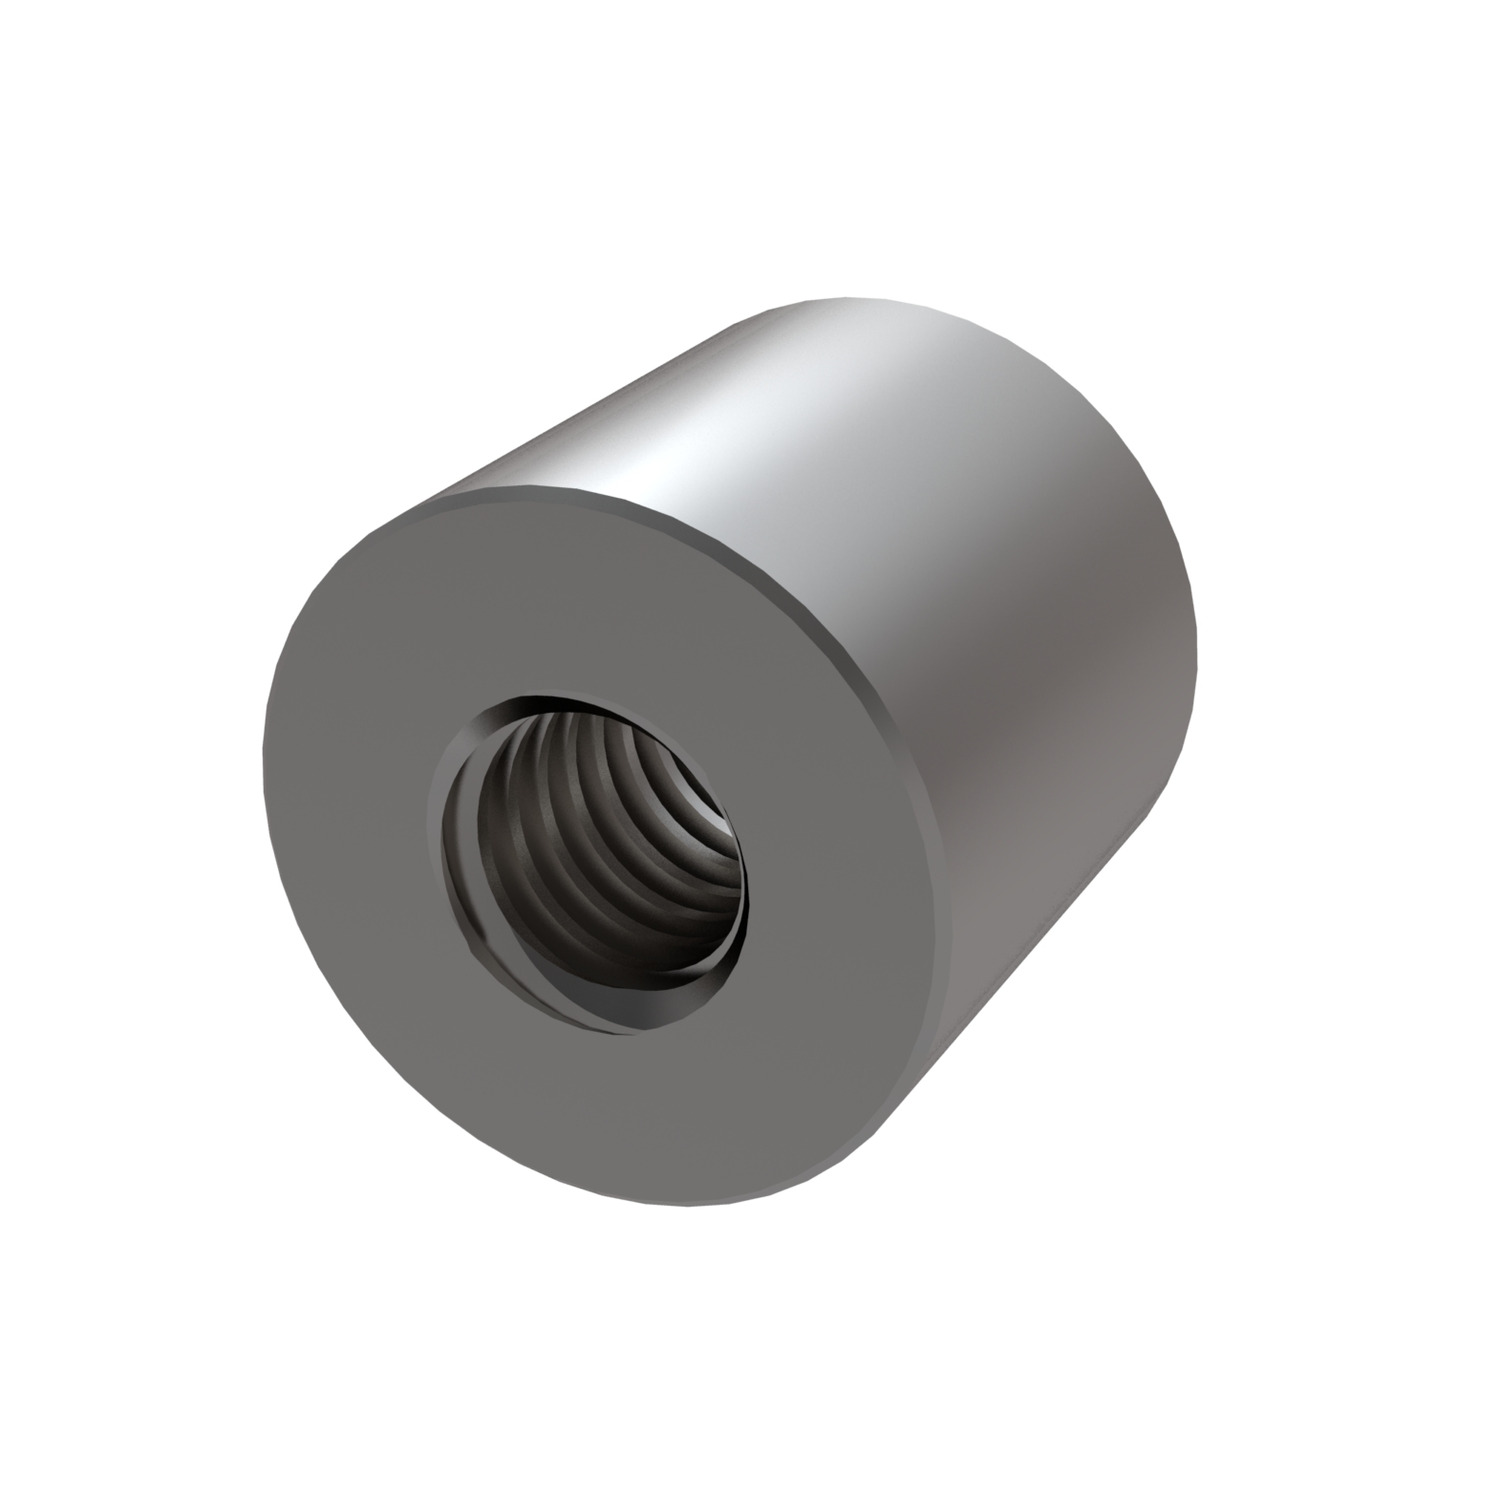 Cylindrical Stainless Steel Nuts Stainless steel lead screw nut for trapezoidal thread. Stainless steel offers excellent corrosion resistance.